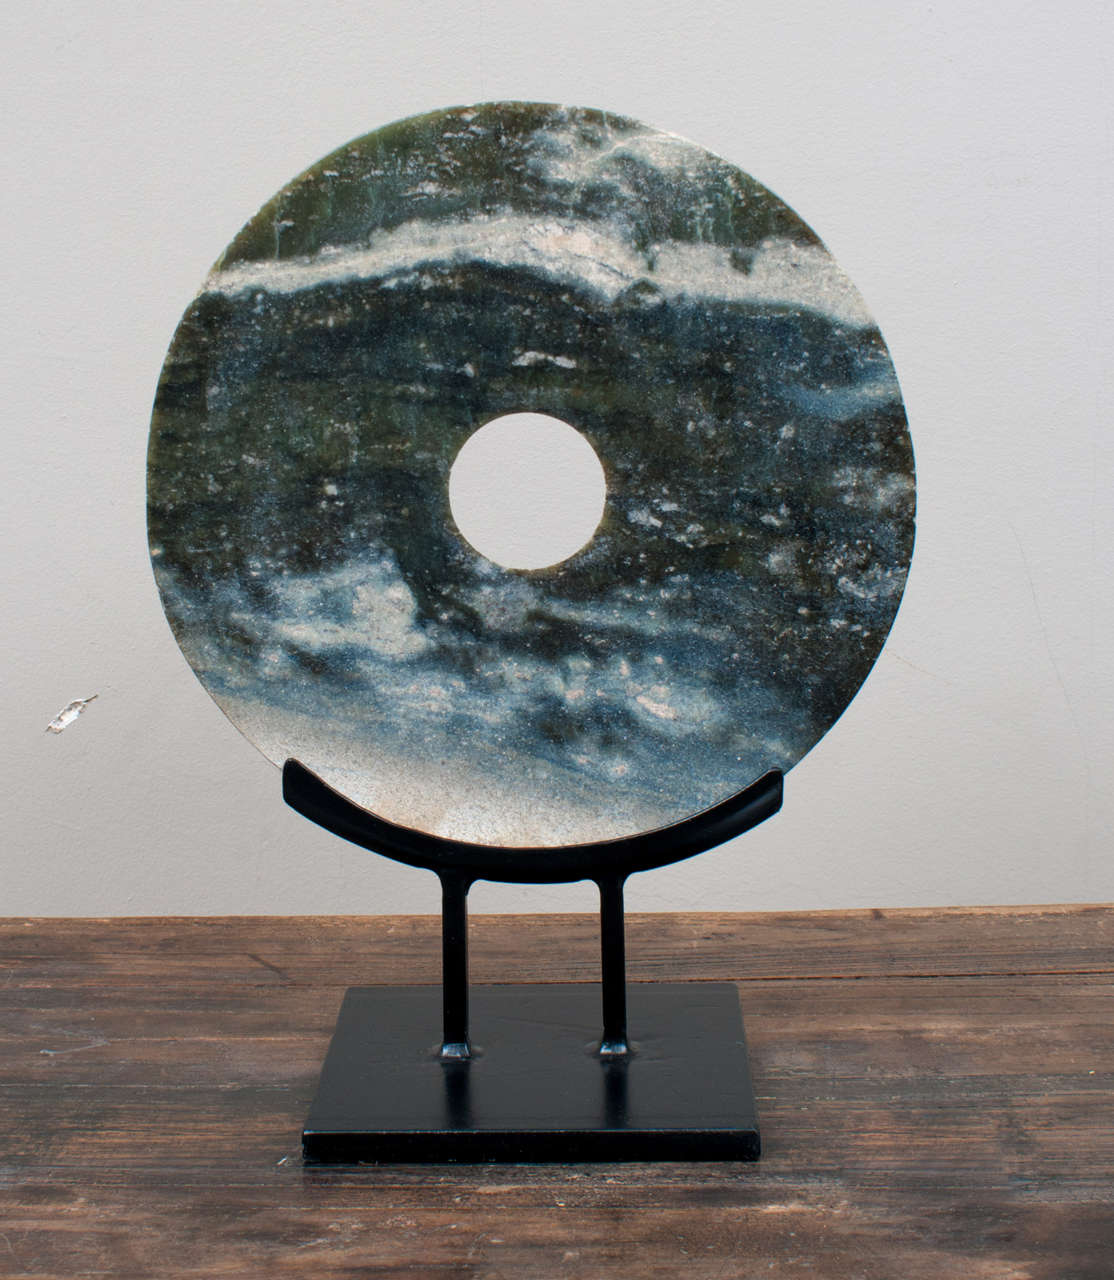 The Bi Disc is an ancient artifact in the form of a circular flat jade disc. The earliest discs were excavated from burial grounds in China. Traditionally the Bi was associated with Heaven, and was perhaps, the first religious symbols. In modern